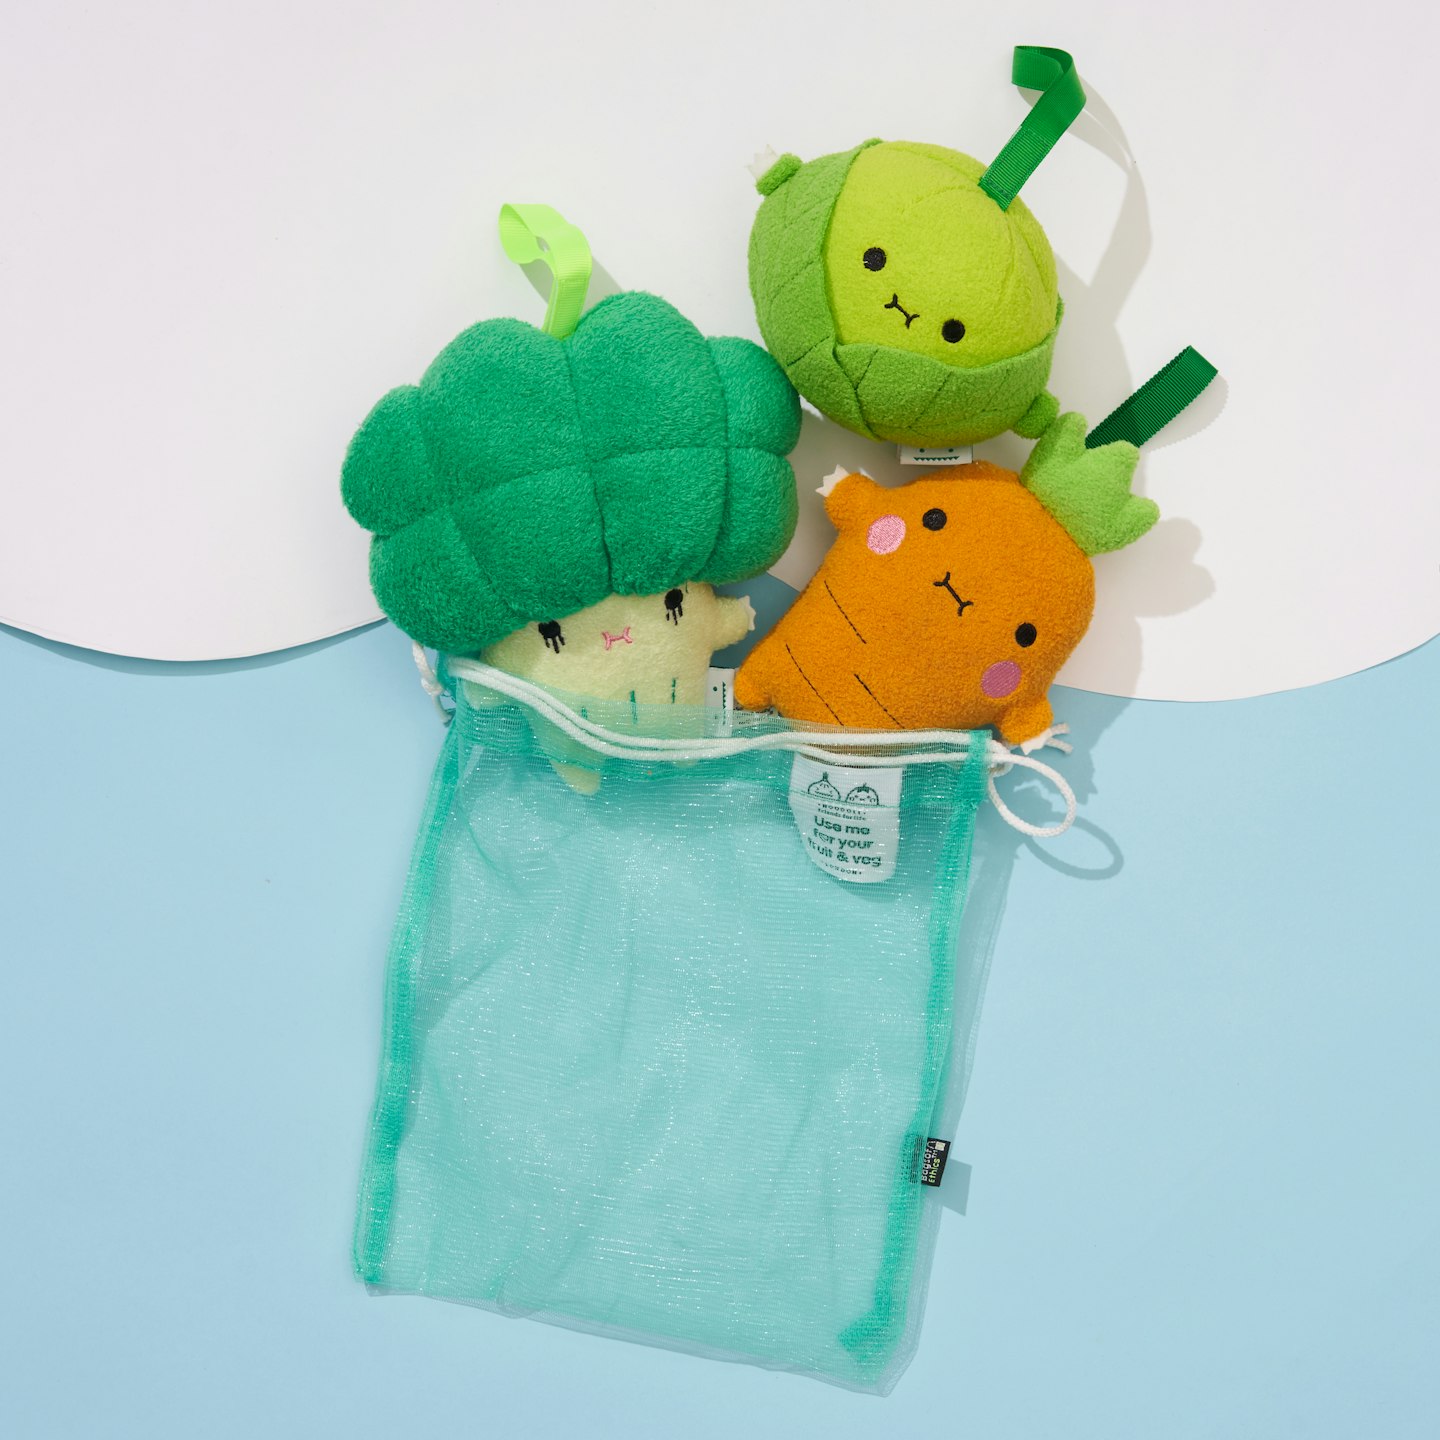 mum to be gifts  Noodoll, Ricesprout, Ricecoli and Ricecrunch Mini Plush Toys, from £16.50